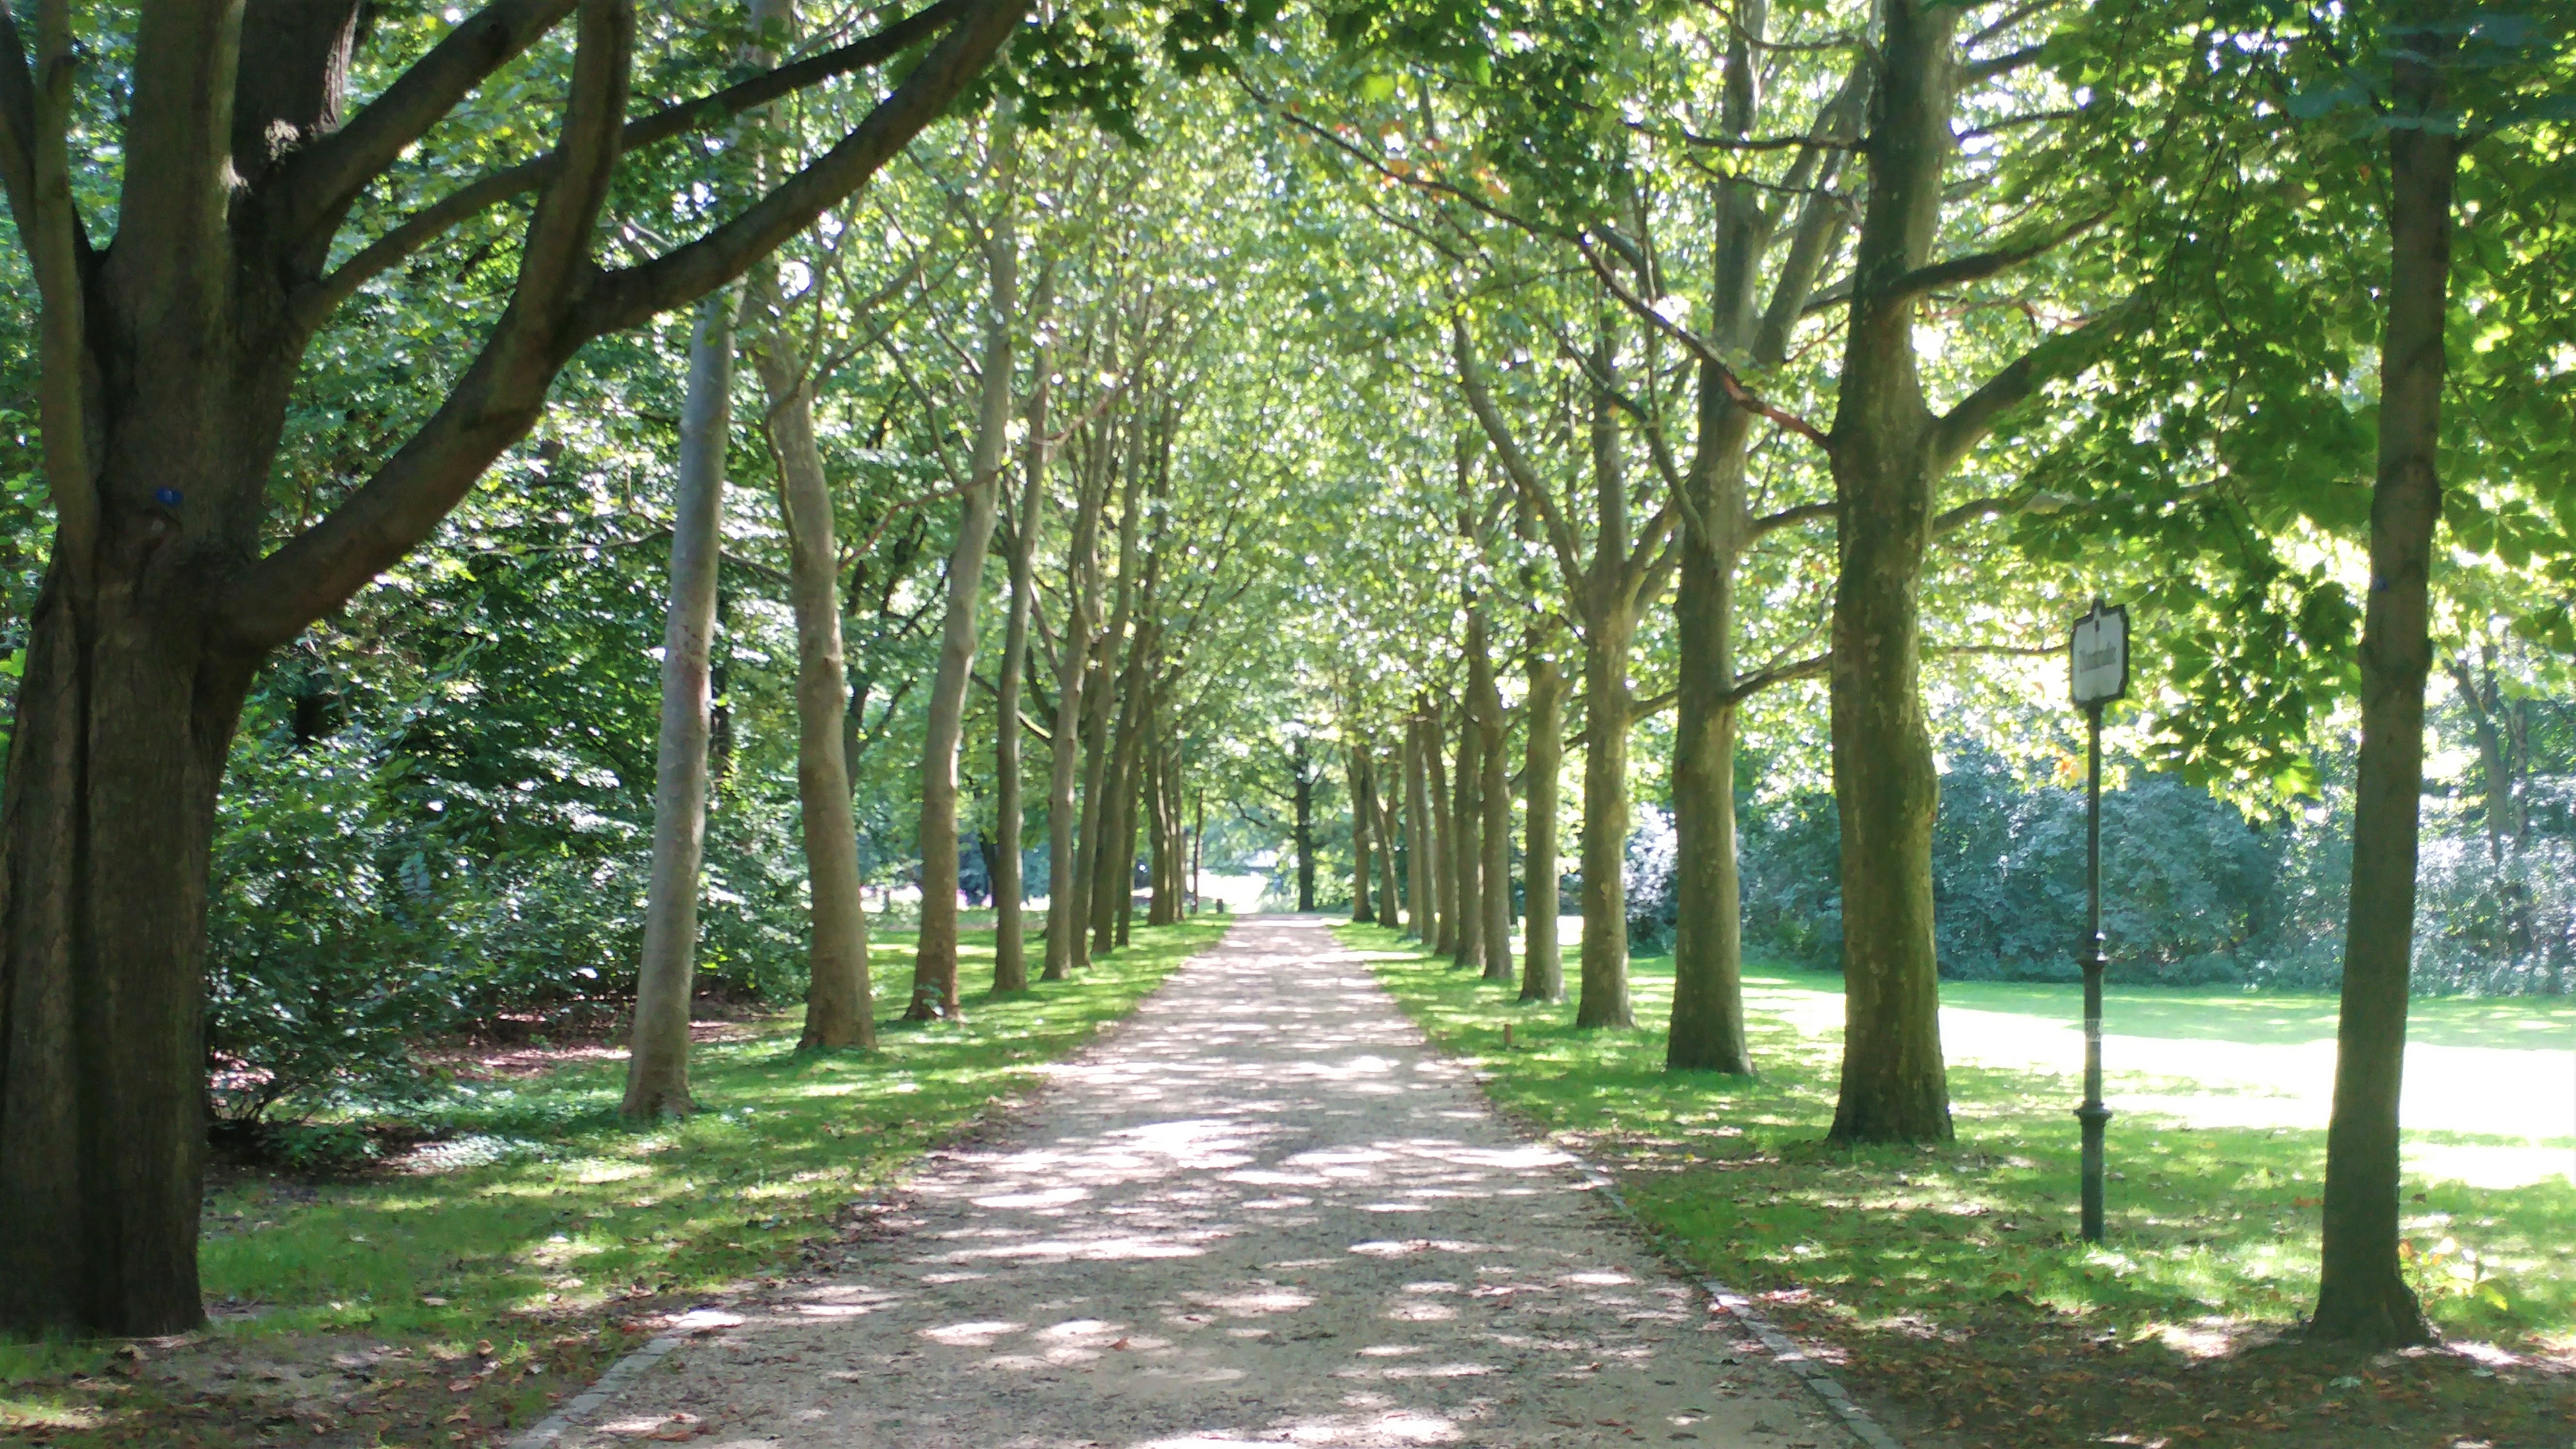 Path lined with trees in the sun